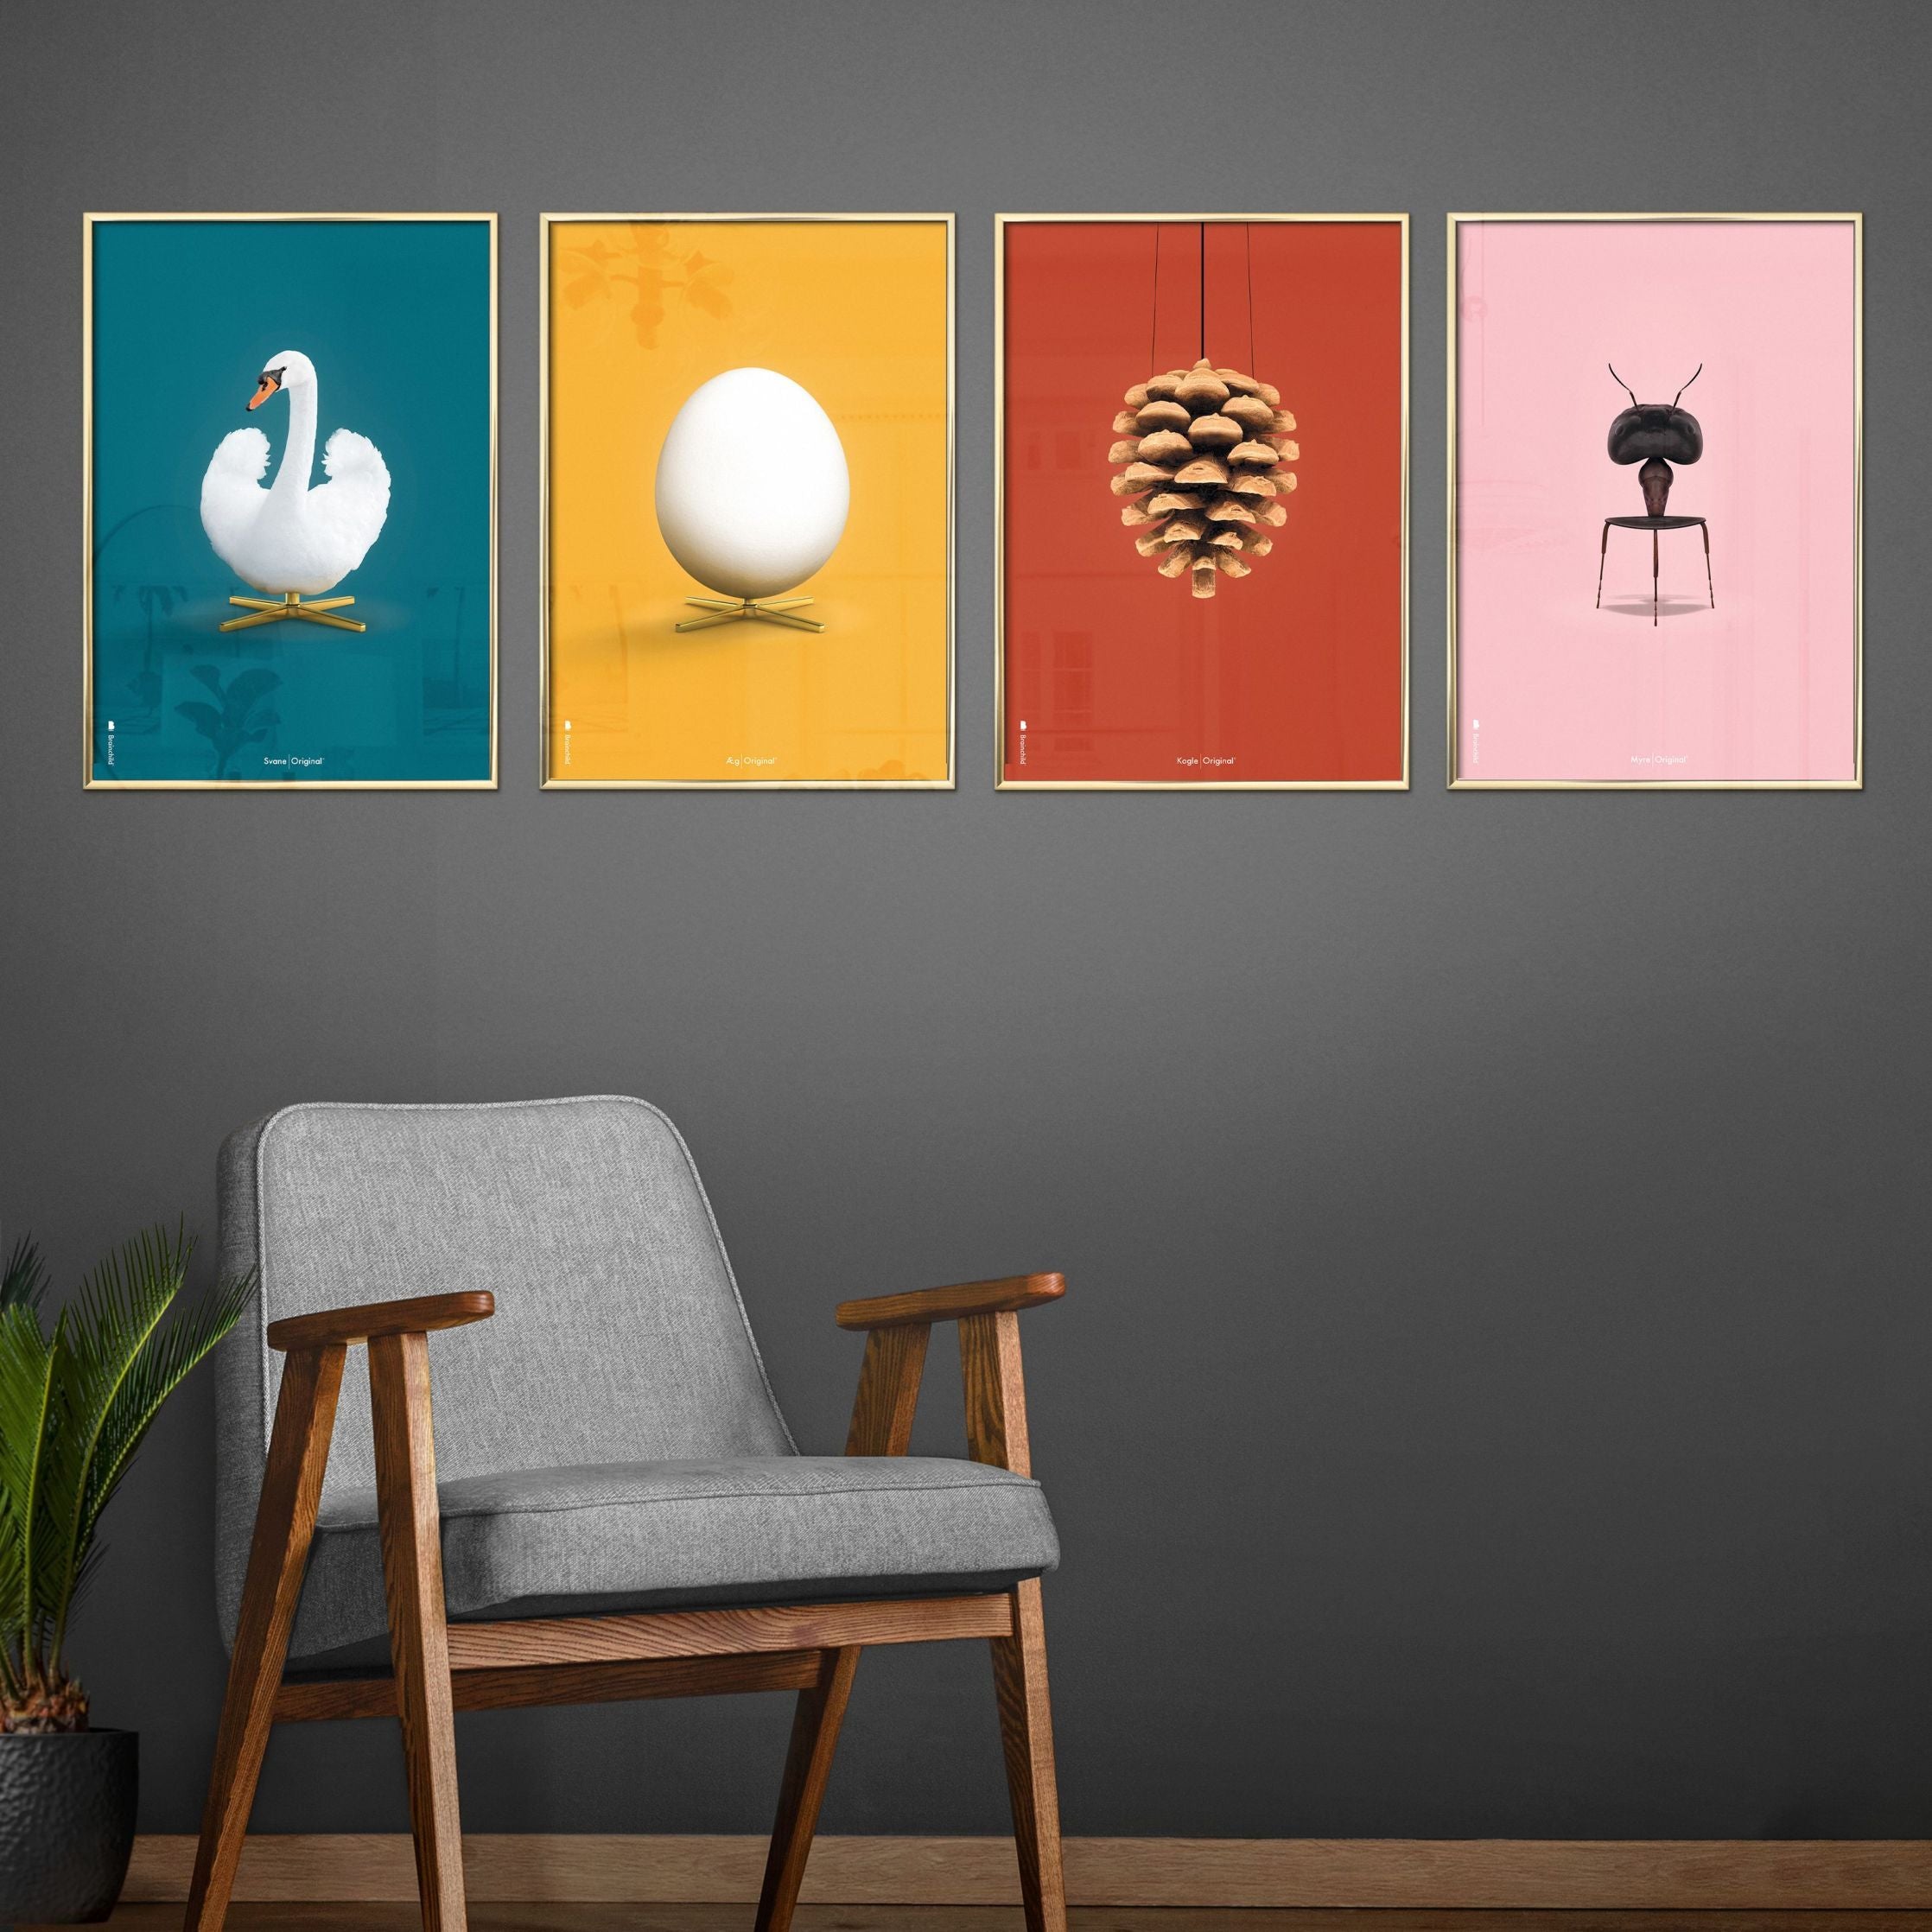 Brainchild Swan Classic Poster Without Frame 30 X40 Cm, Petroleum Blue Background